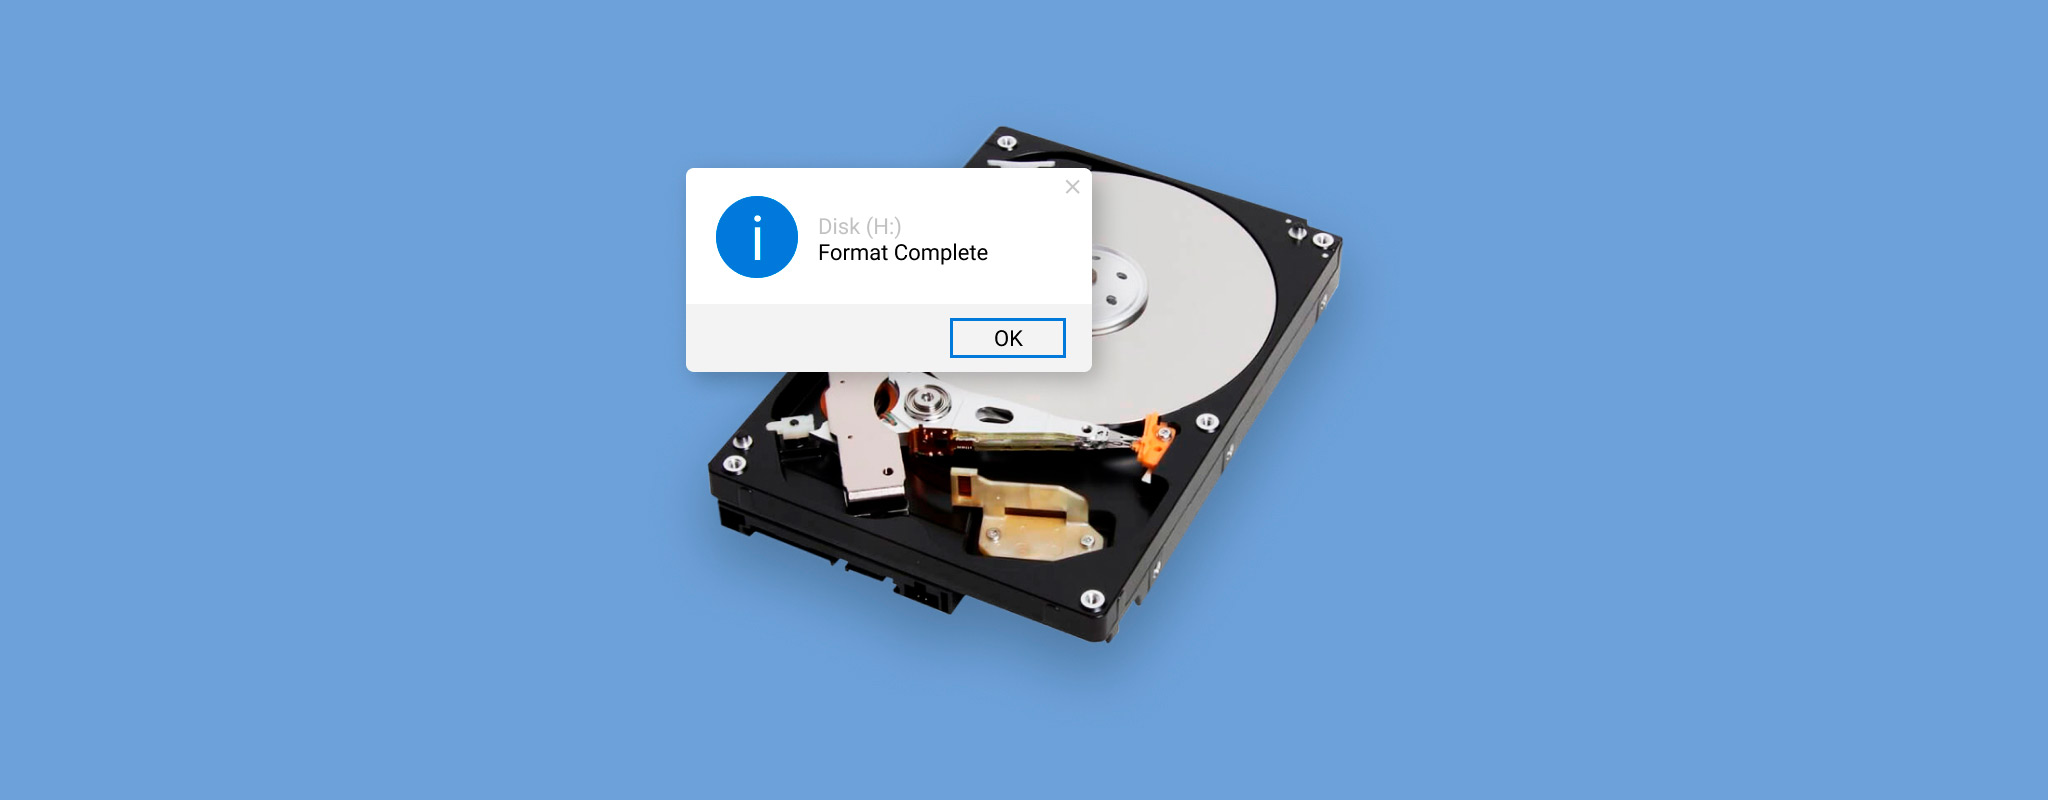 How to Recover Files a Formatted Hard Drive [Guide]